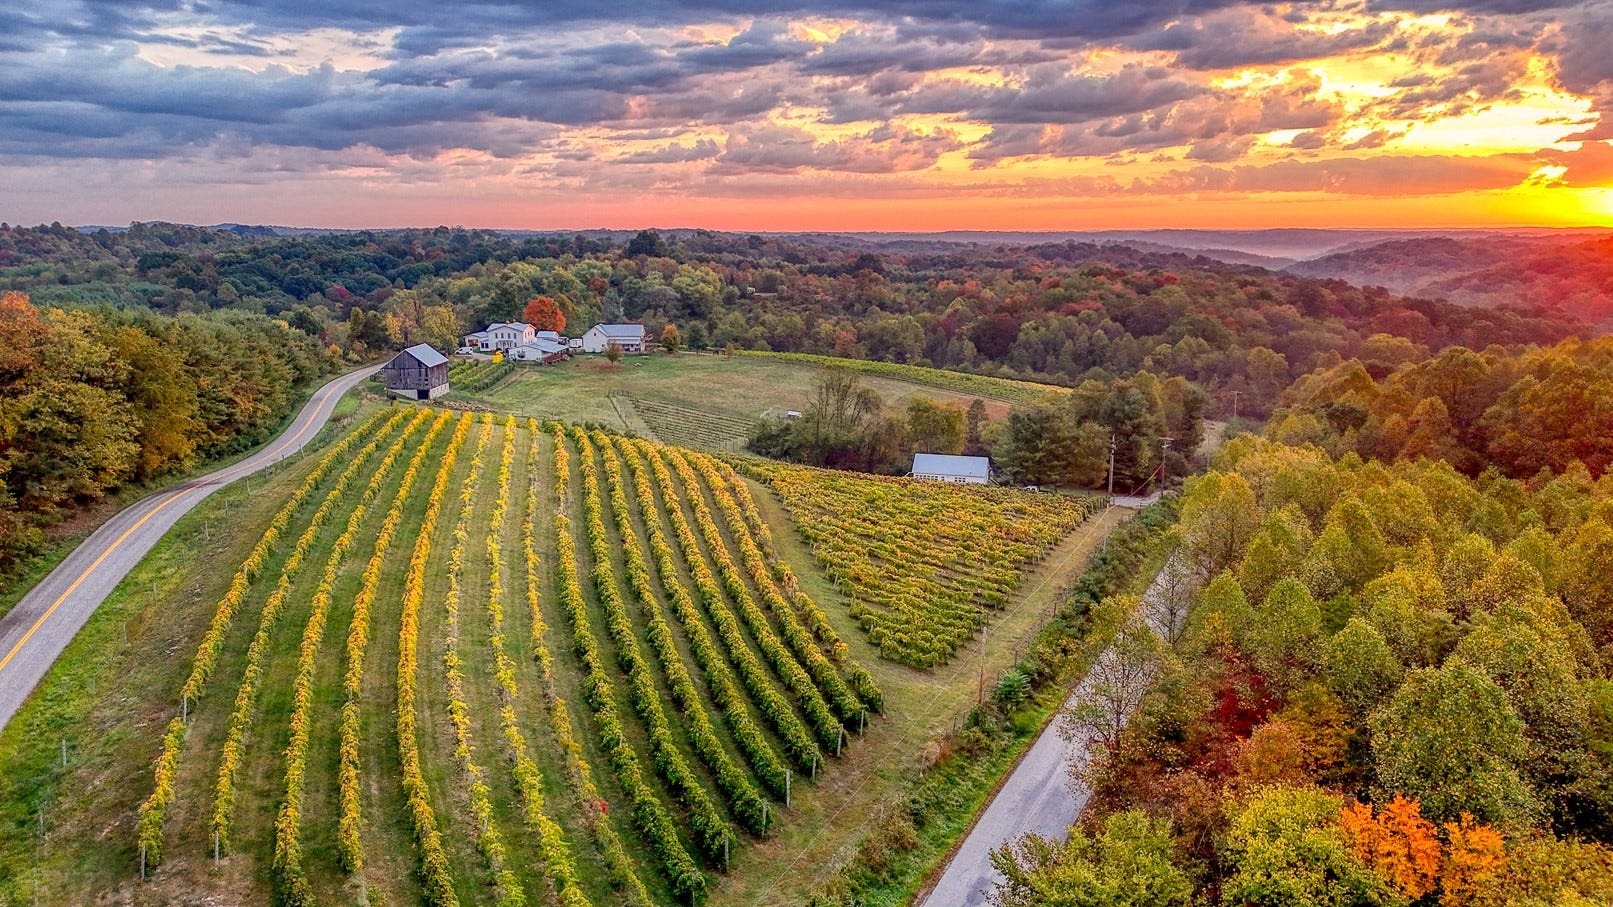 Make time for wine! June is Ohio Wine Month. Here's what you need to know to celebrate